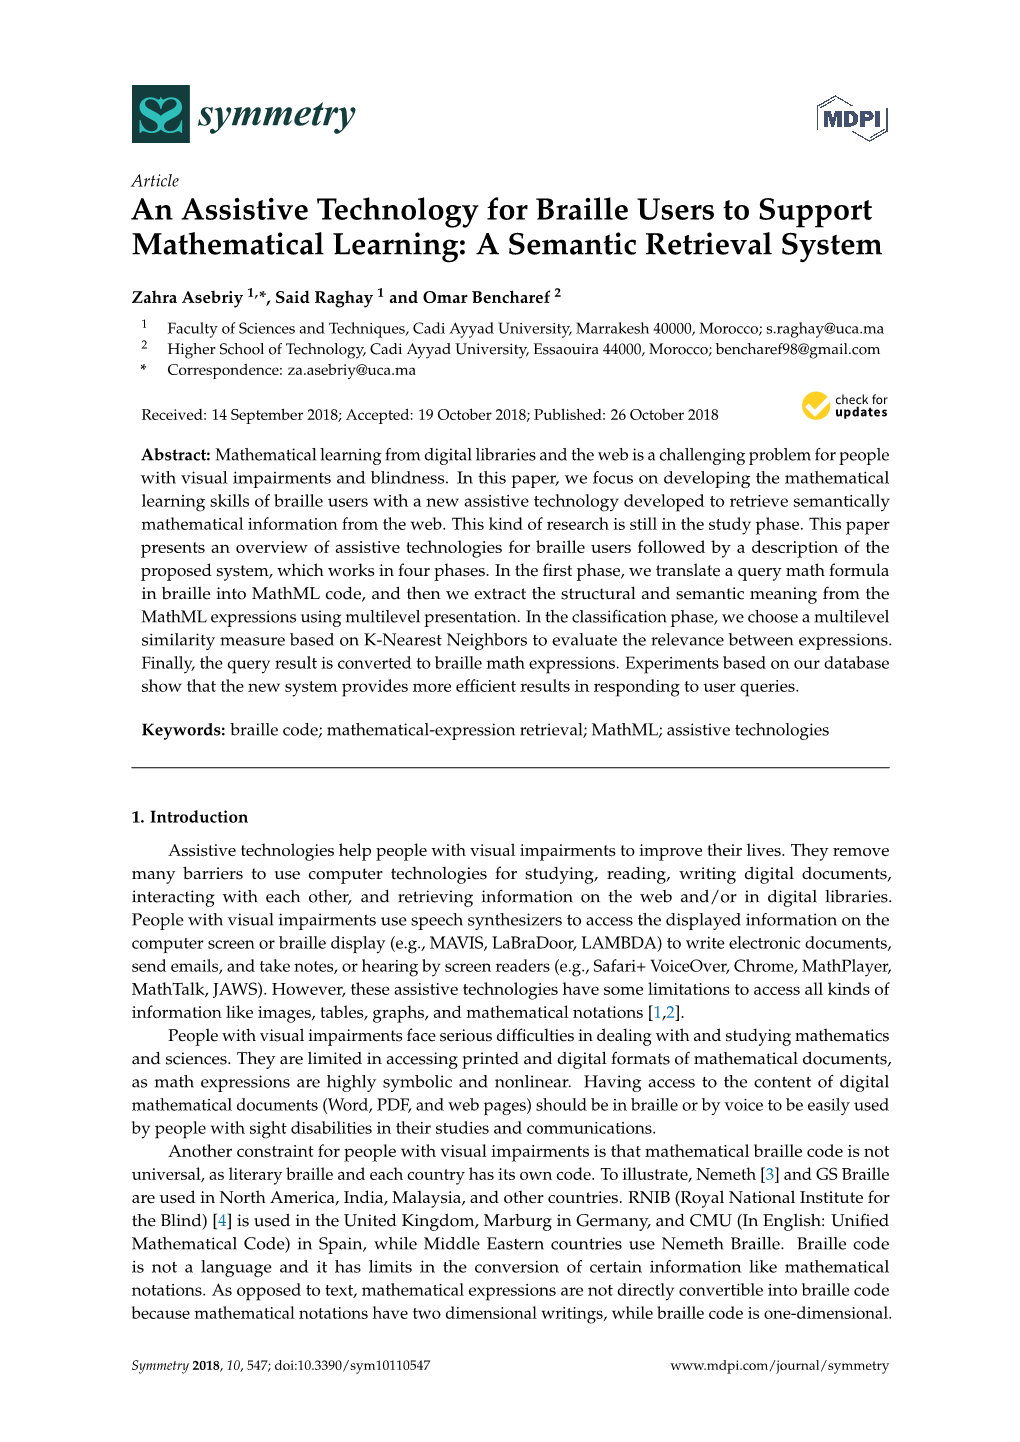 An Assistive Technology for Braille Users to Support Mathematical Learning: a Semantic Retrieval System